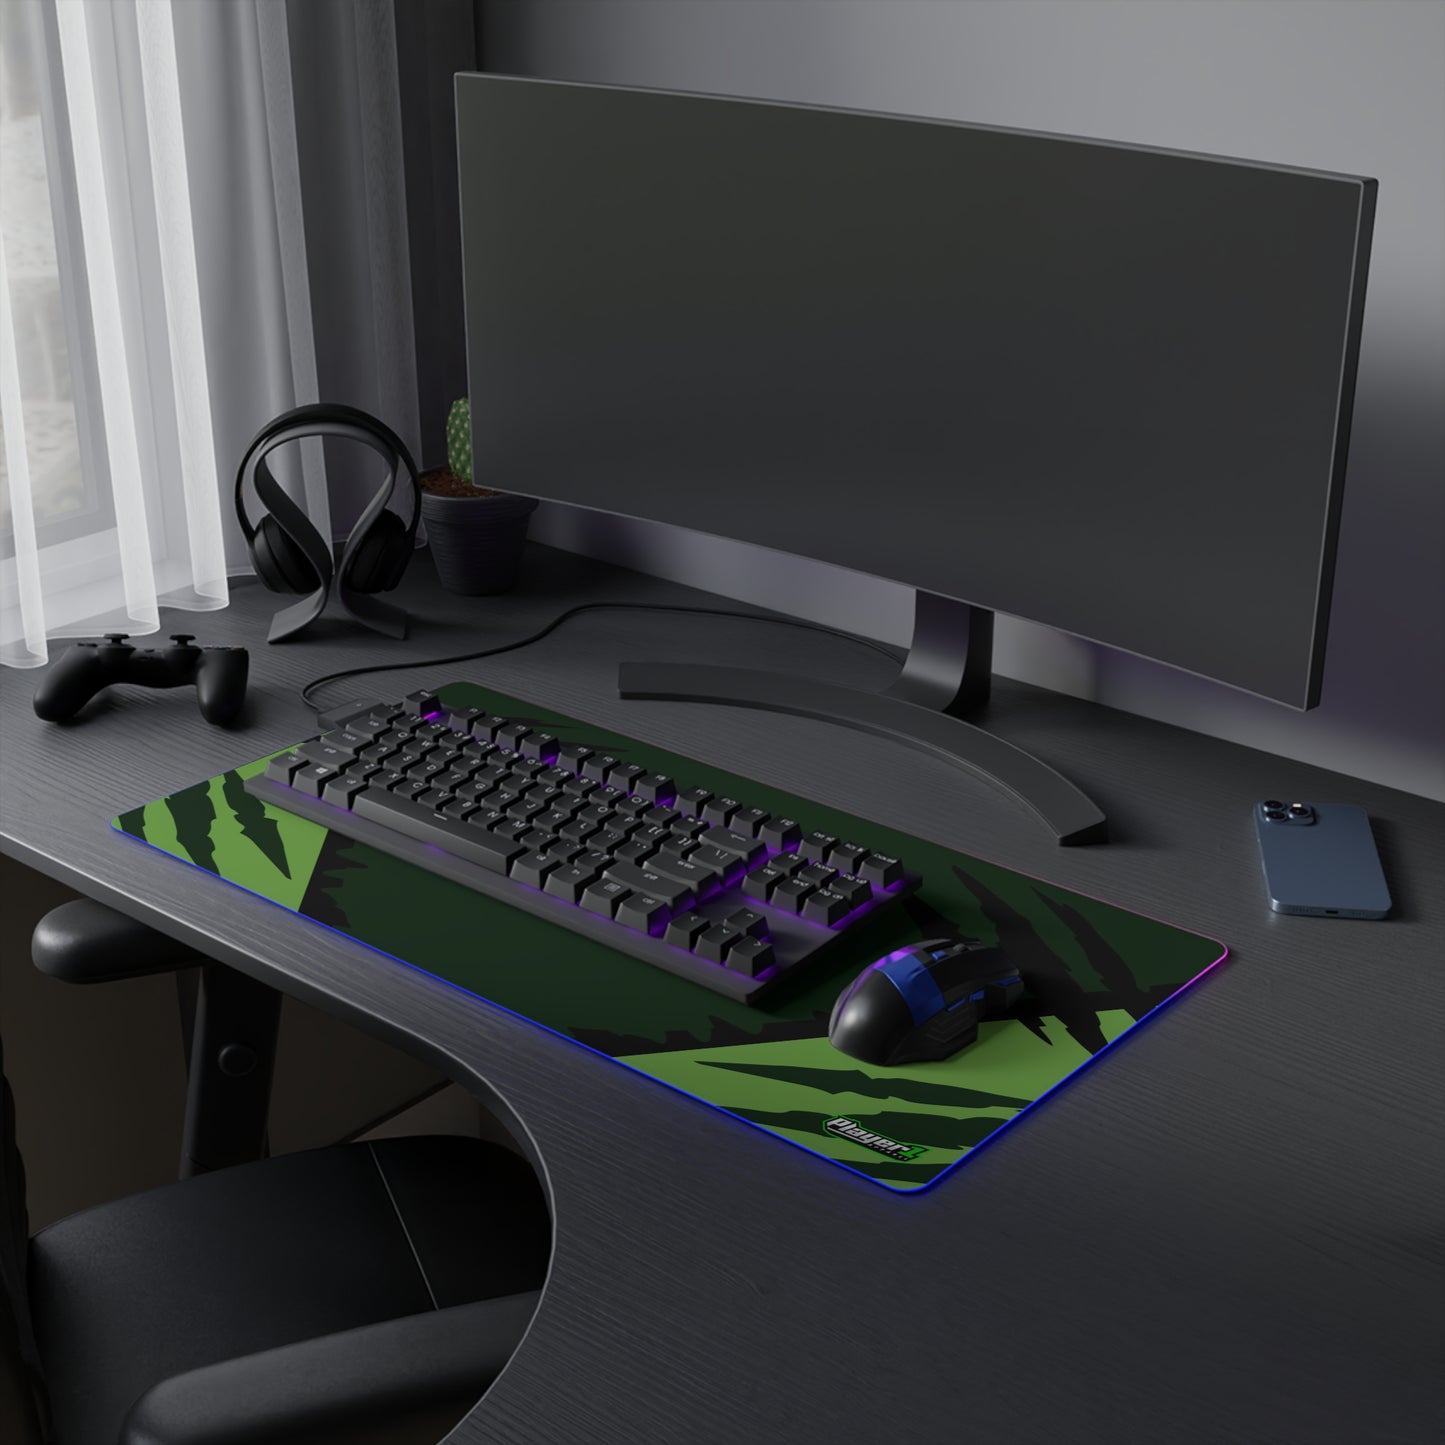 Swampy LED Gaming Mouse Pad